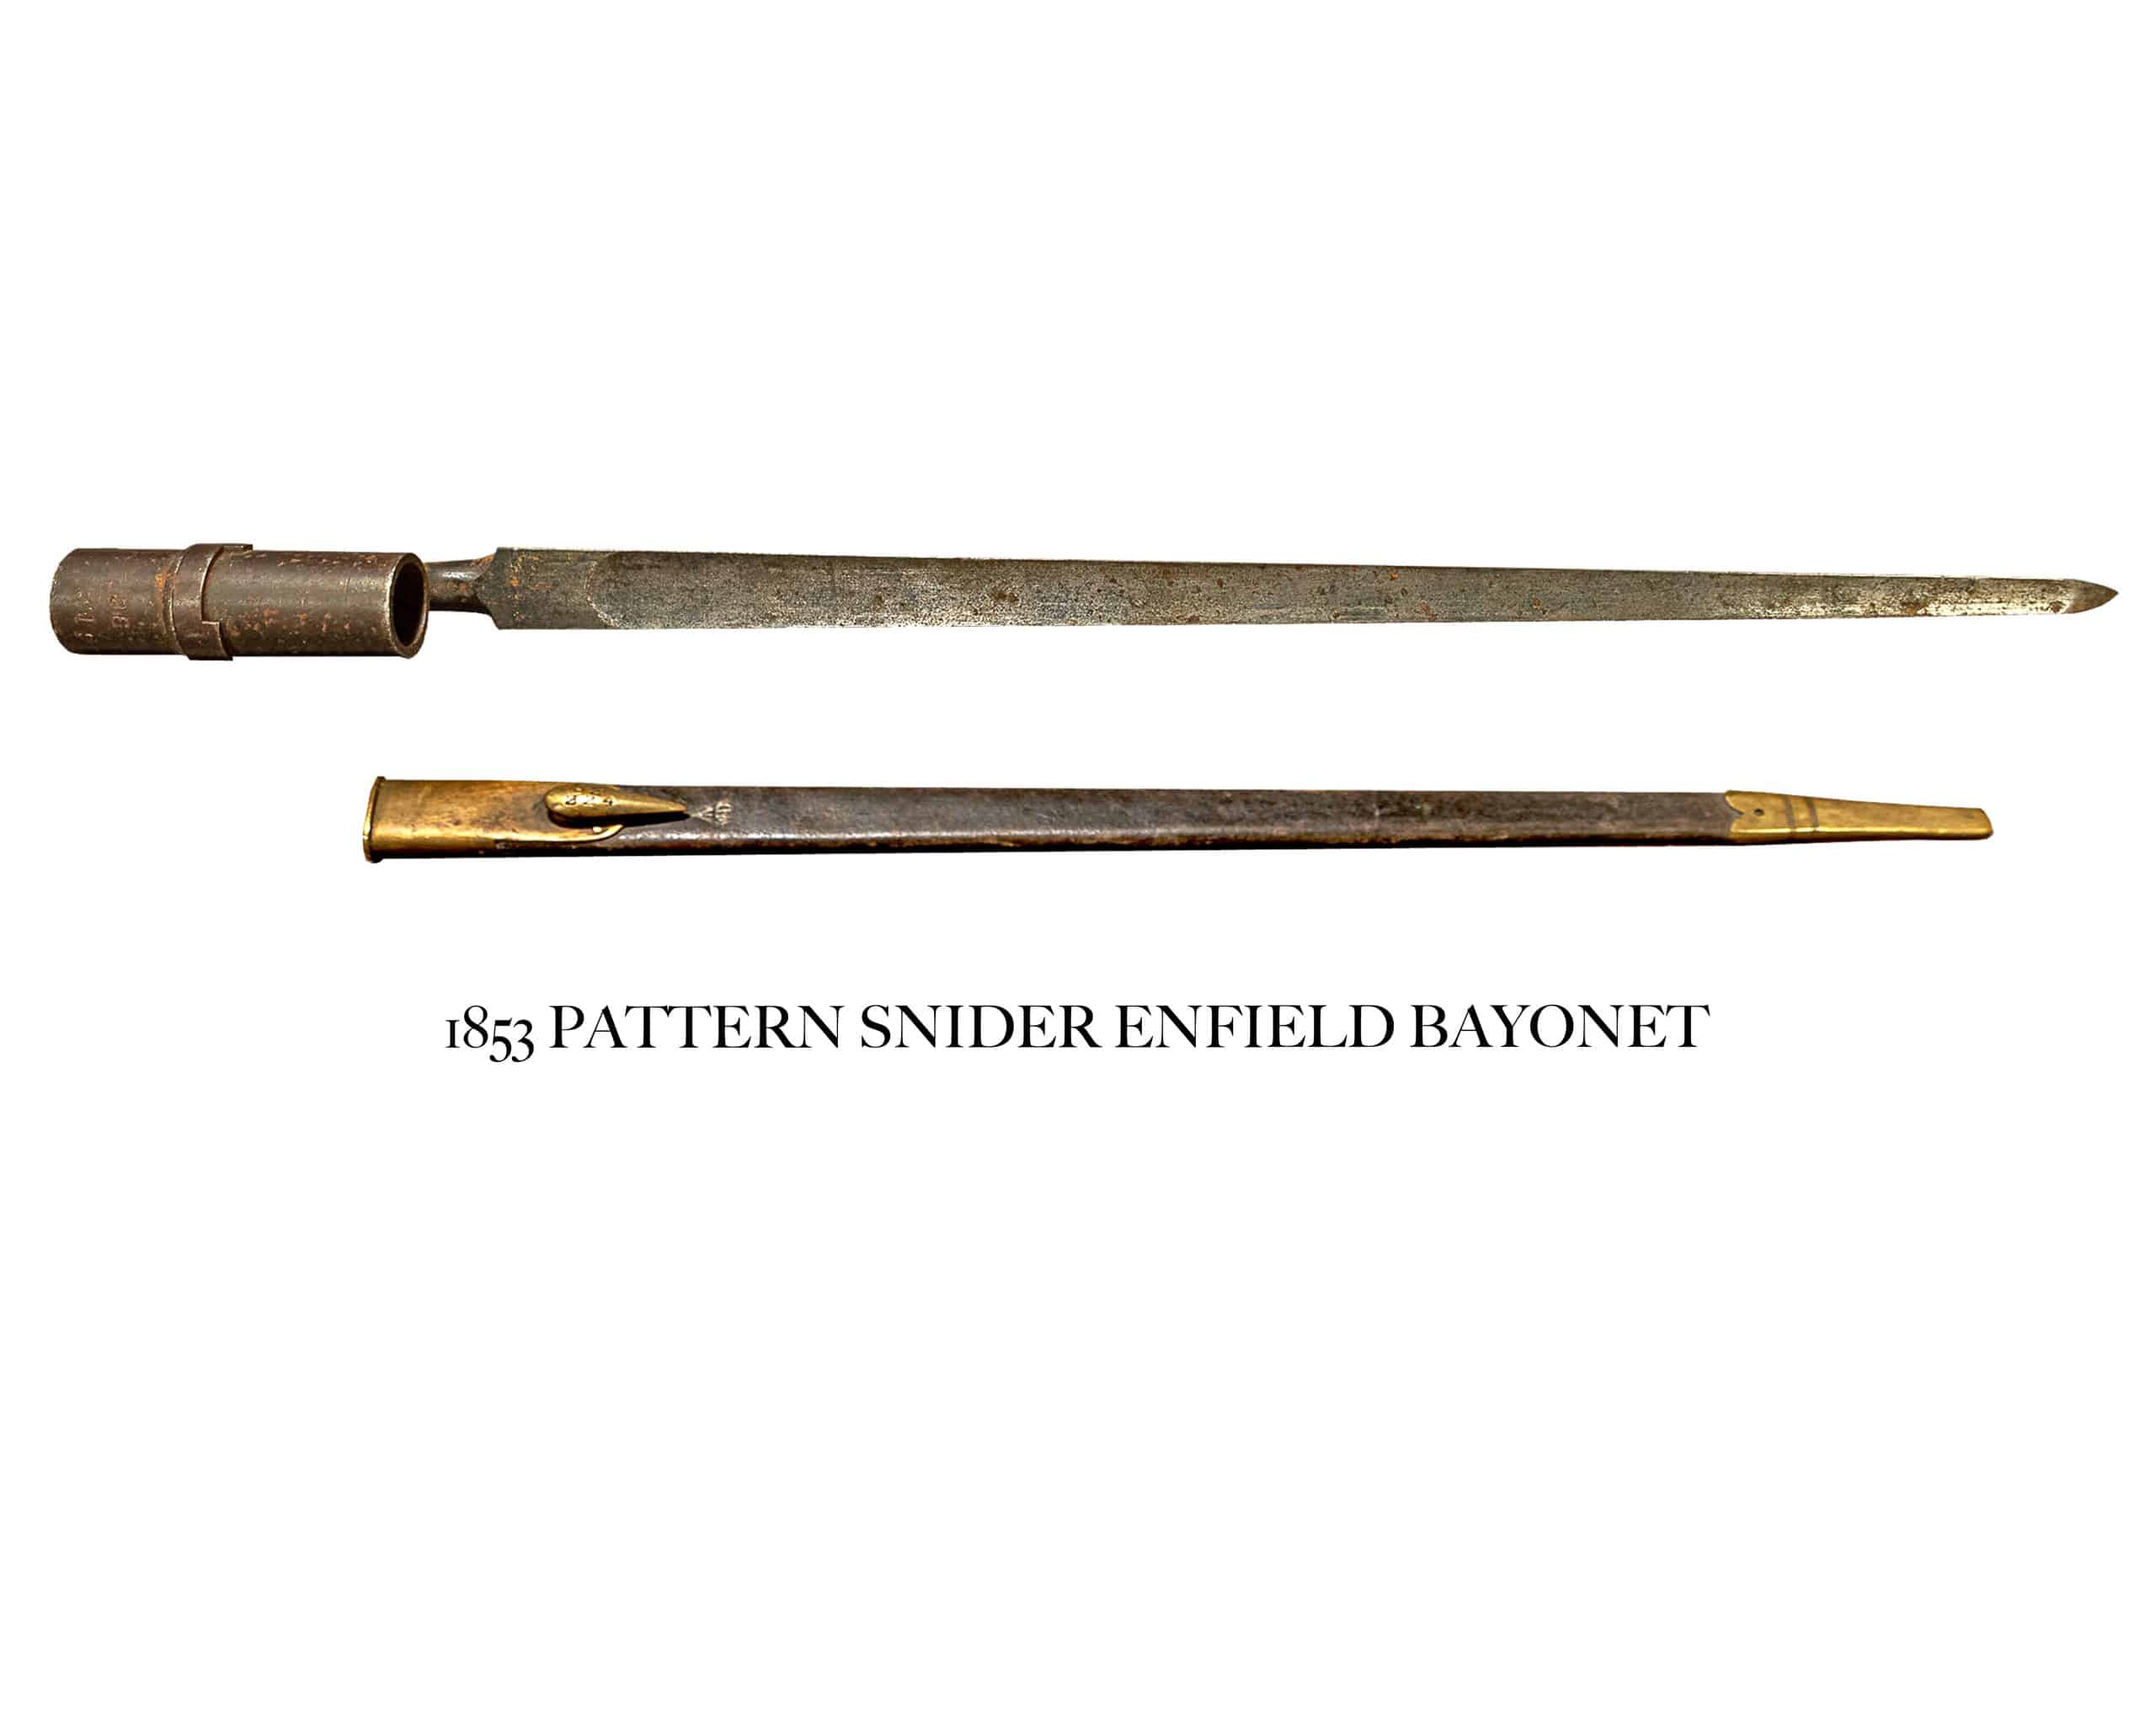 1853-PATTERN-SNIDER-ENFIELD-BAYONET-scaled